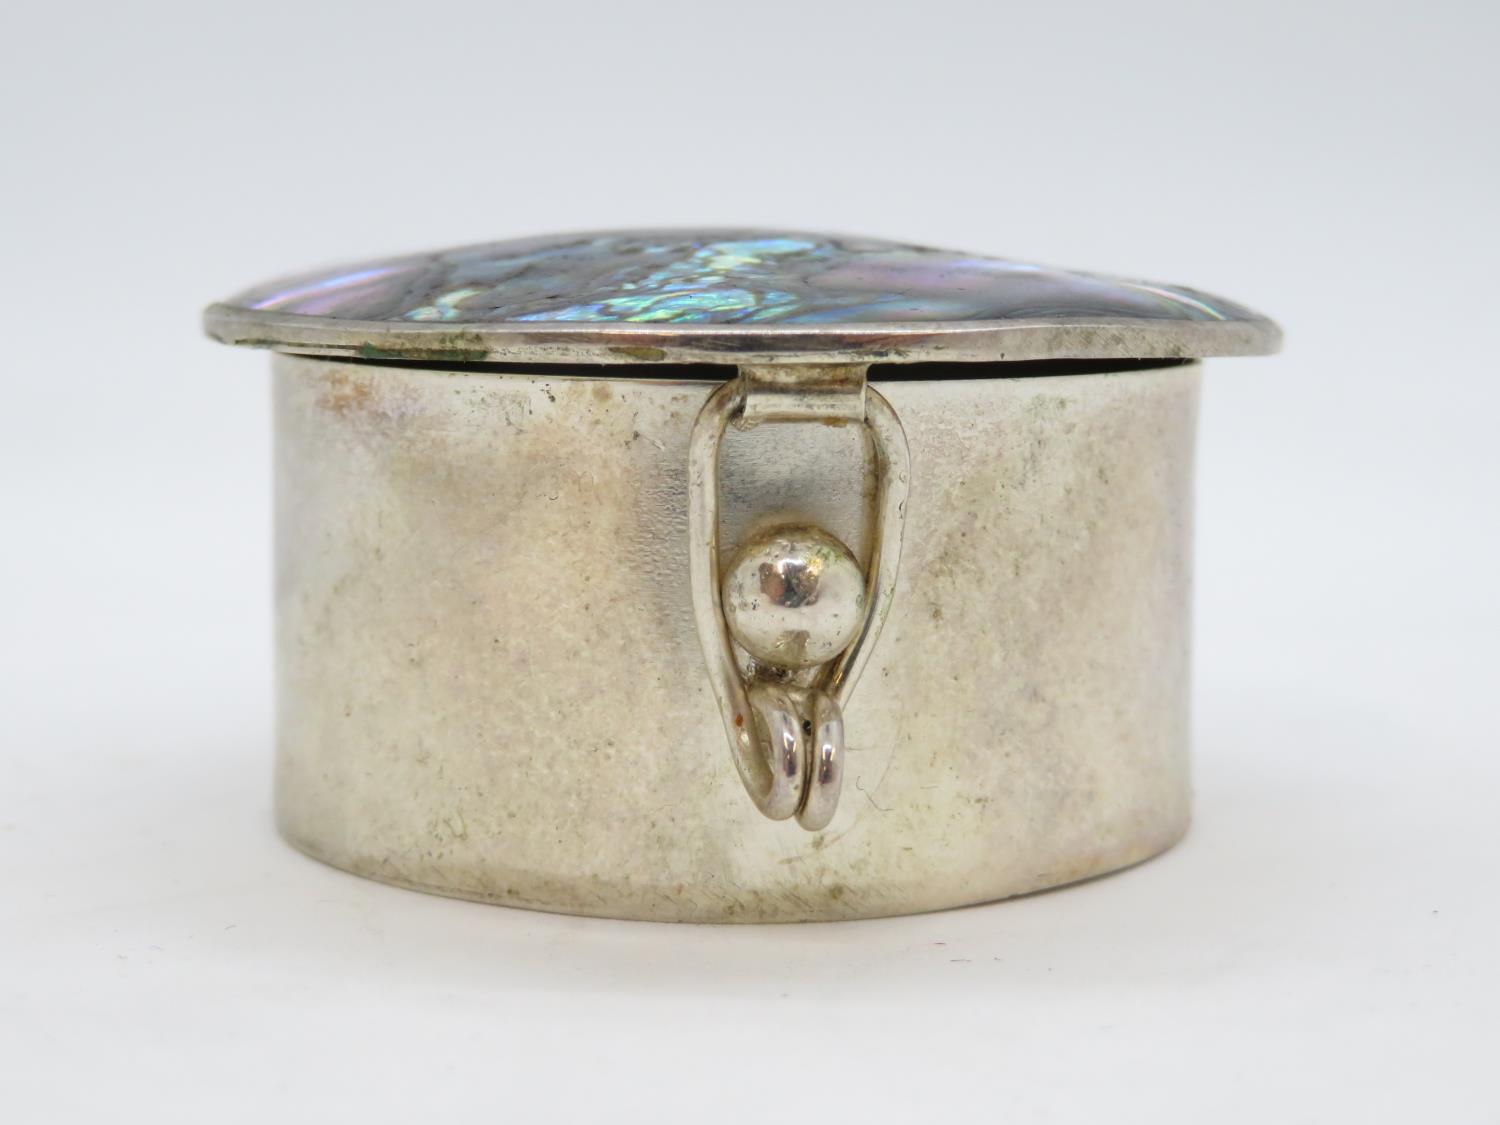 Silver and abalone shell trinket box - Image 3 of 3